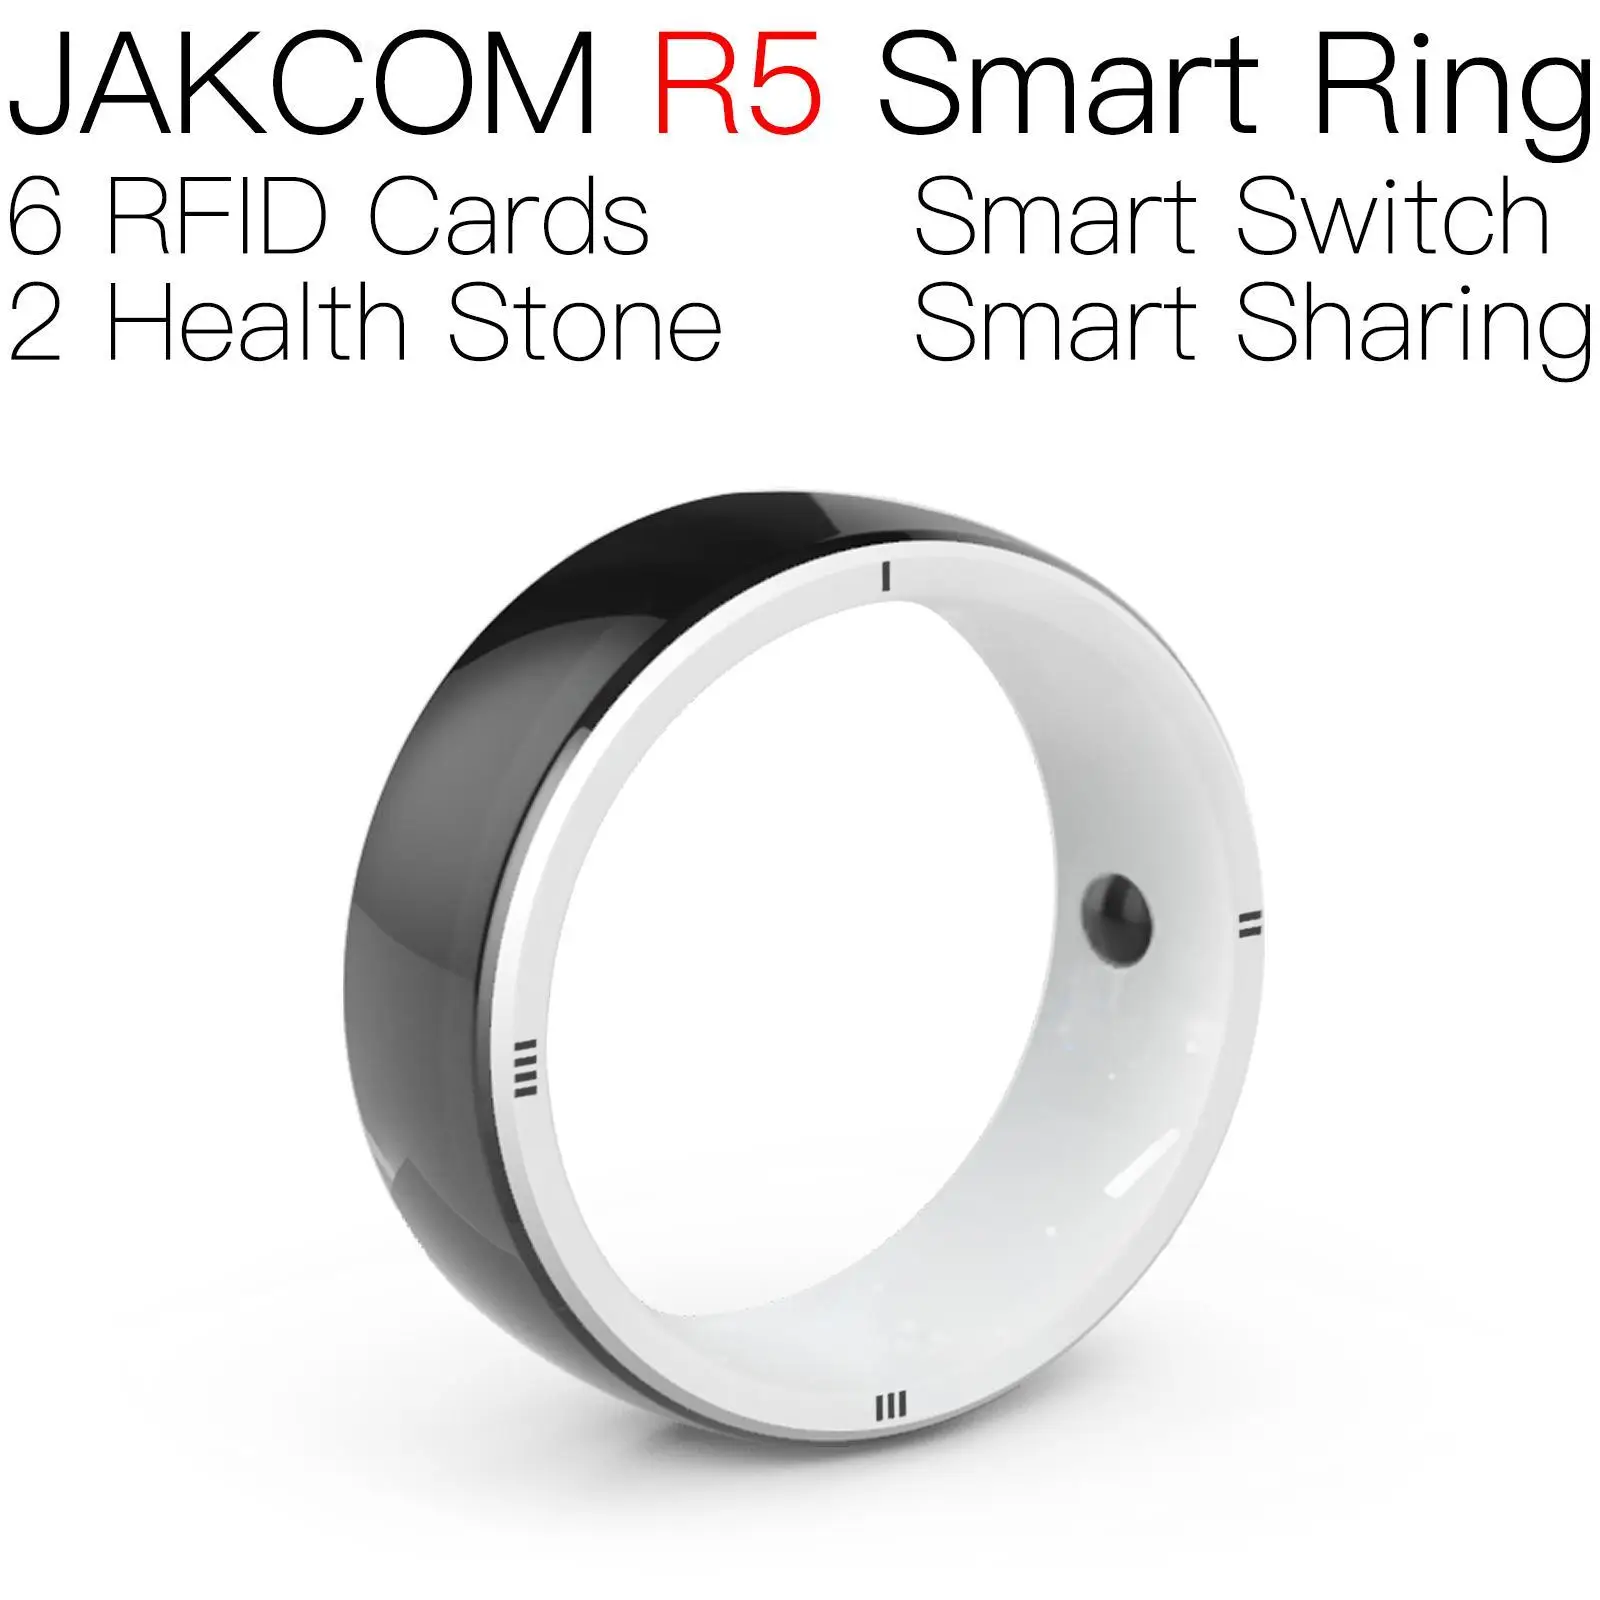 

JAKCOM R5 Smart Ring Super value as rfid tag uhf card uid rewritable ring nfc charon baby 2 sticer pay rf id sticker telephone